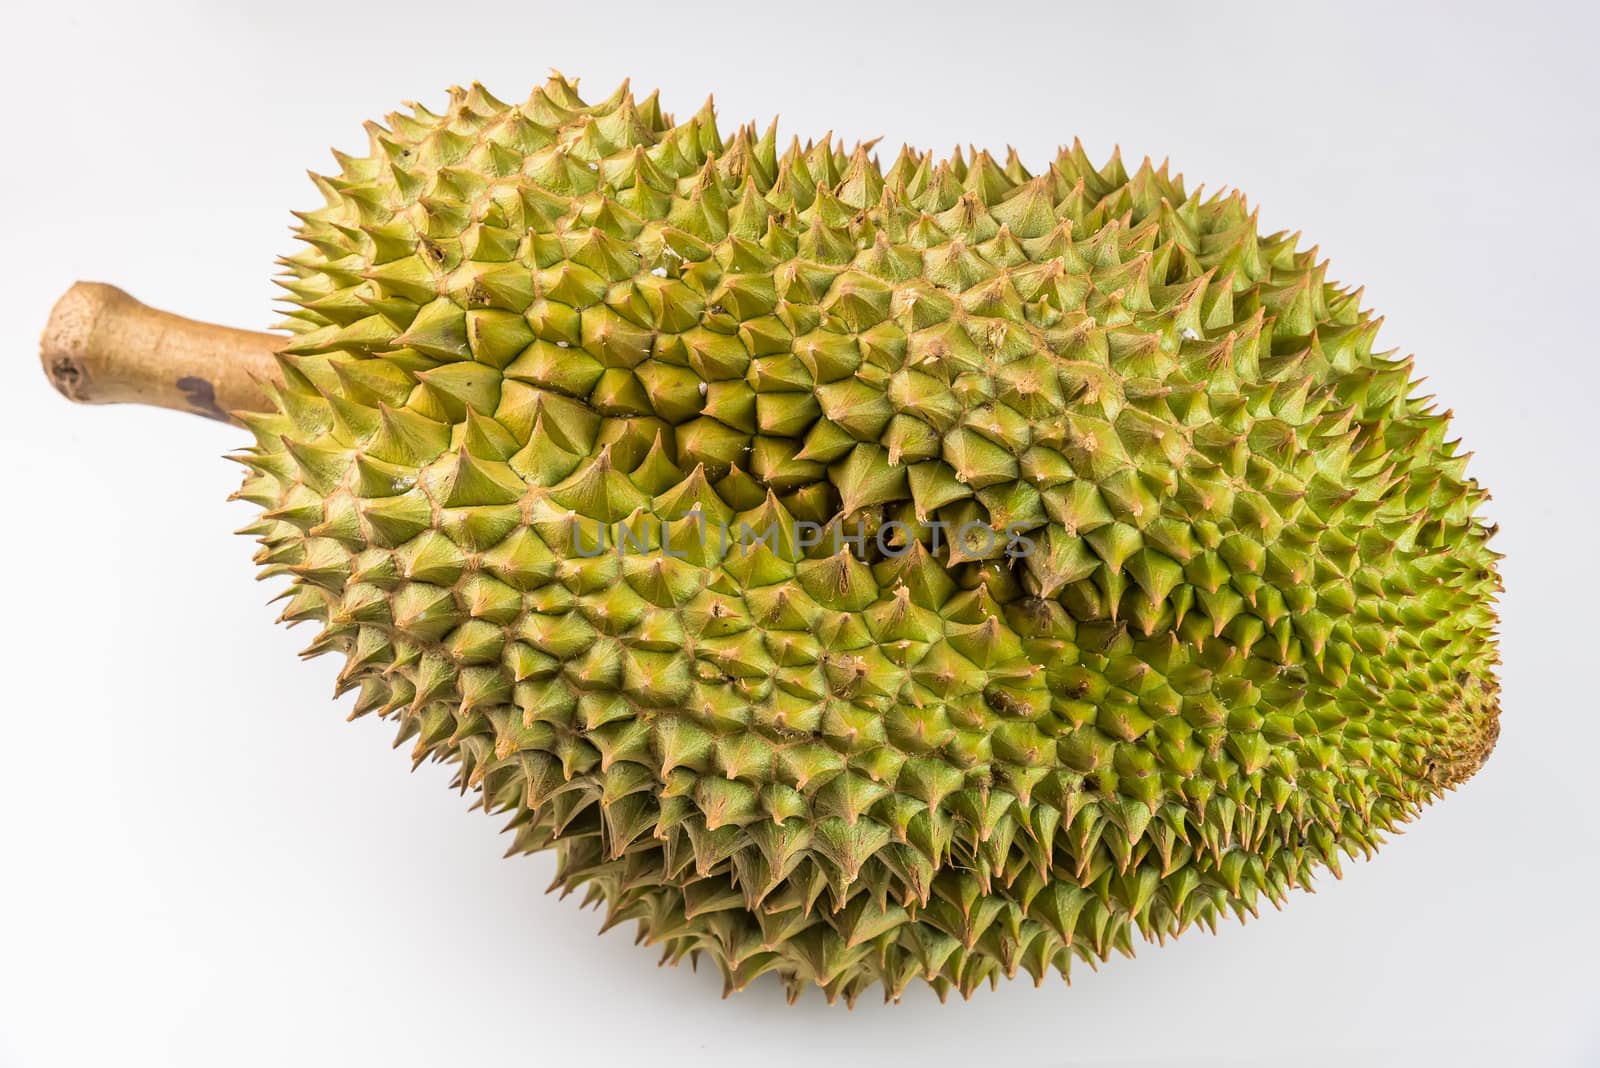 Durian fruit ripe pillars are not peeled isolated on white backg by Bubbers